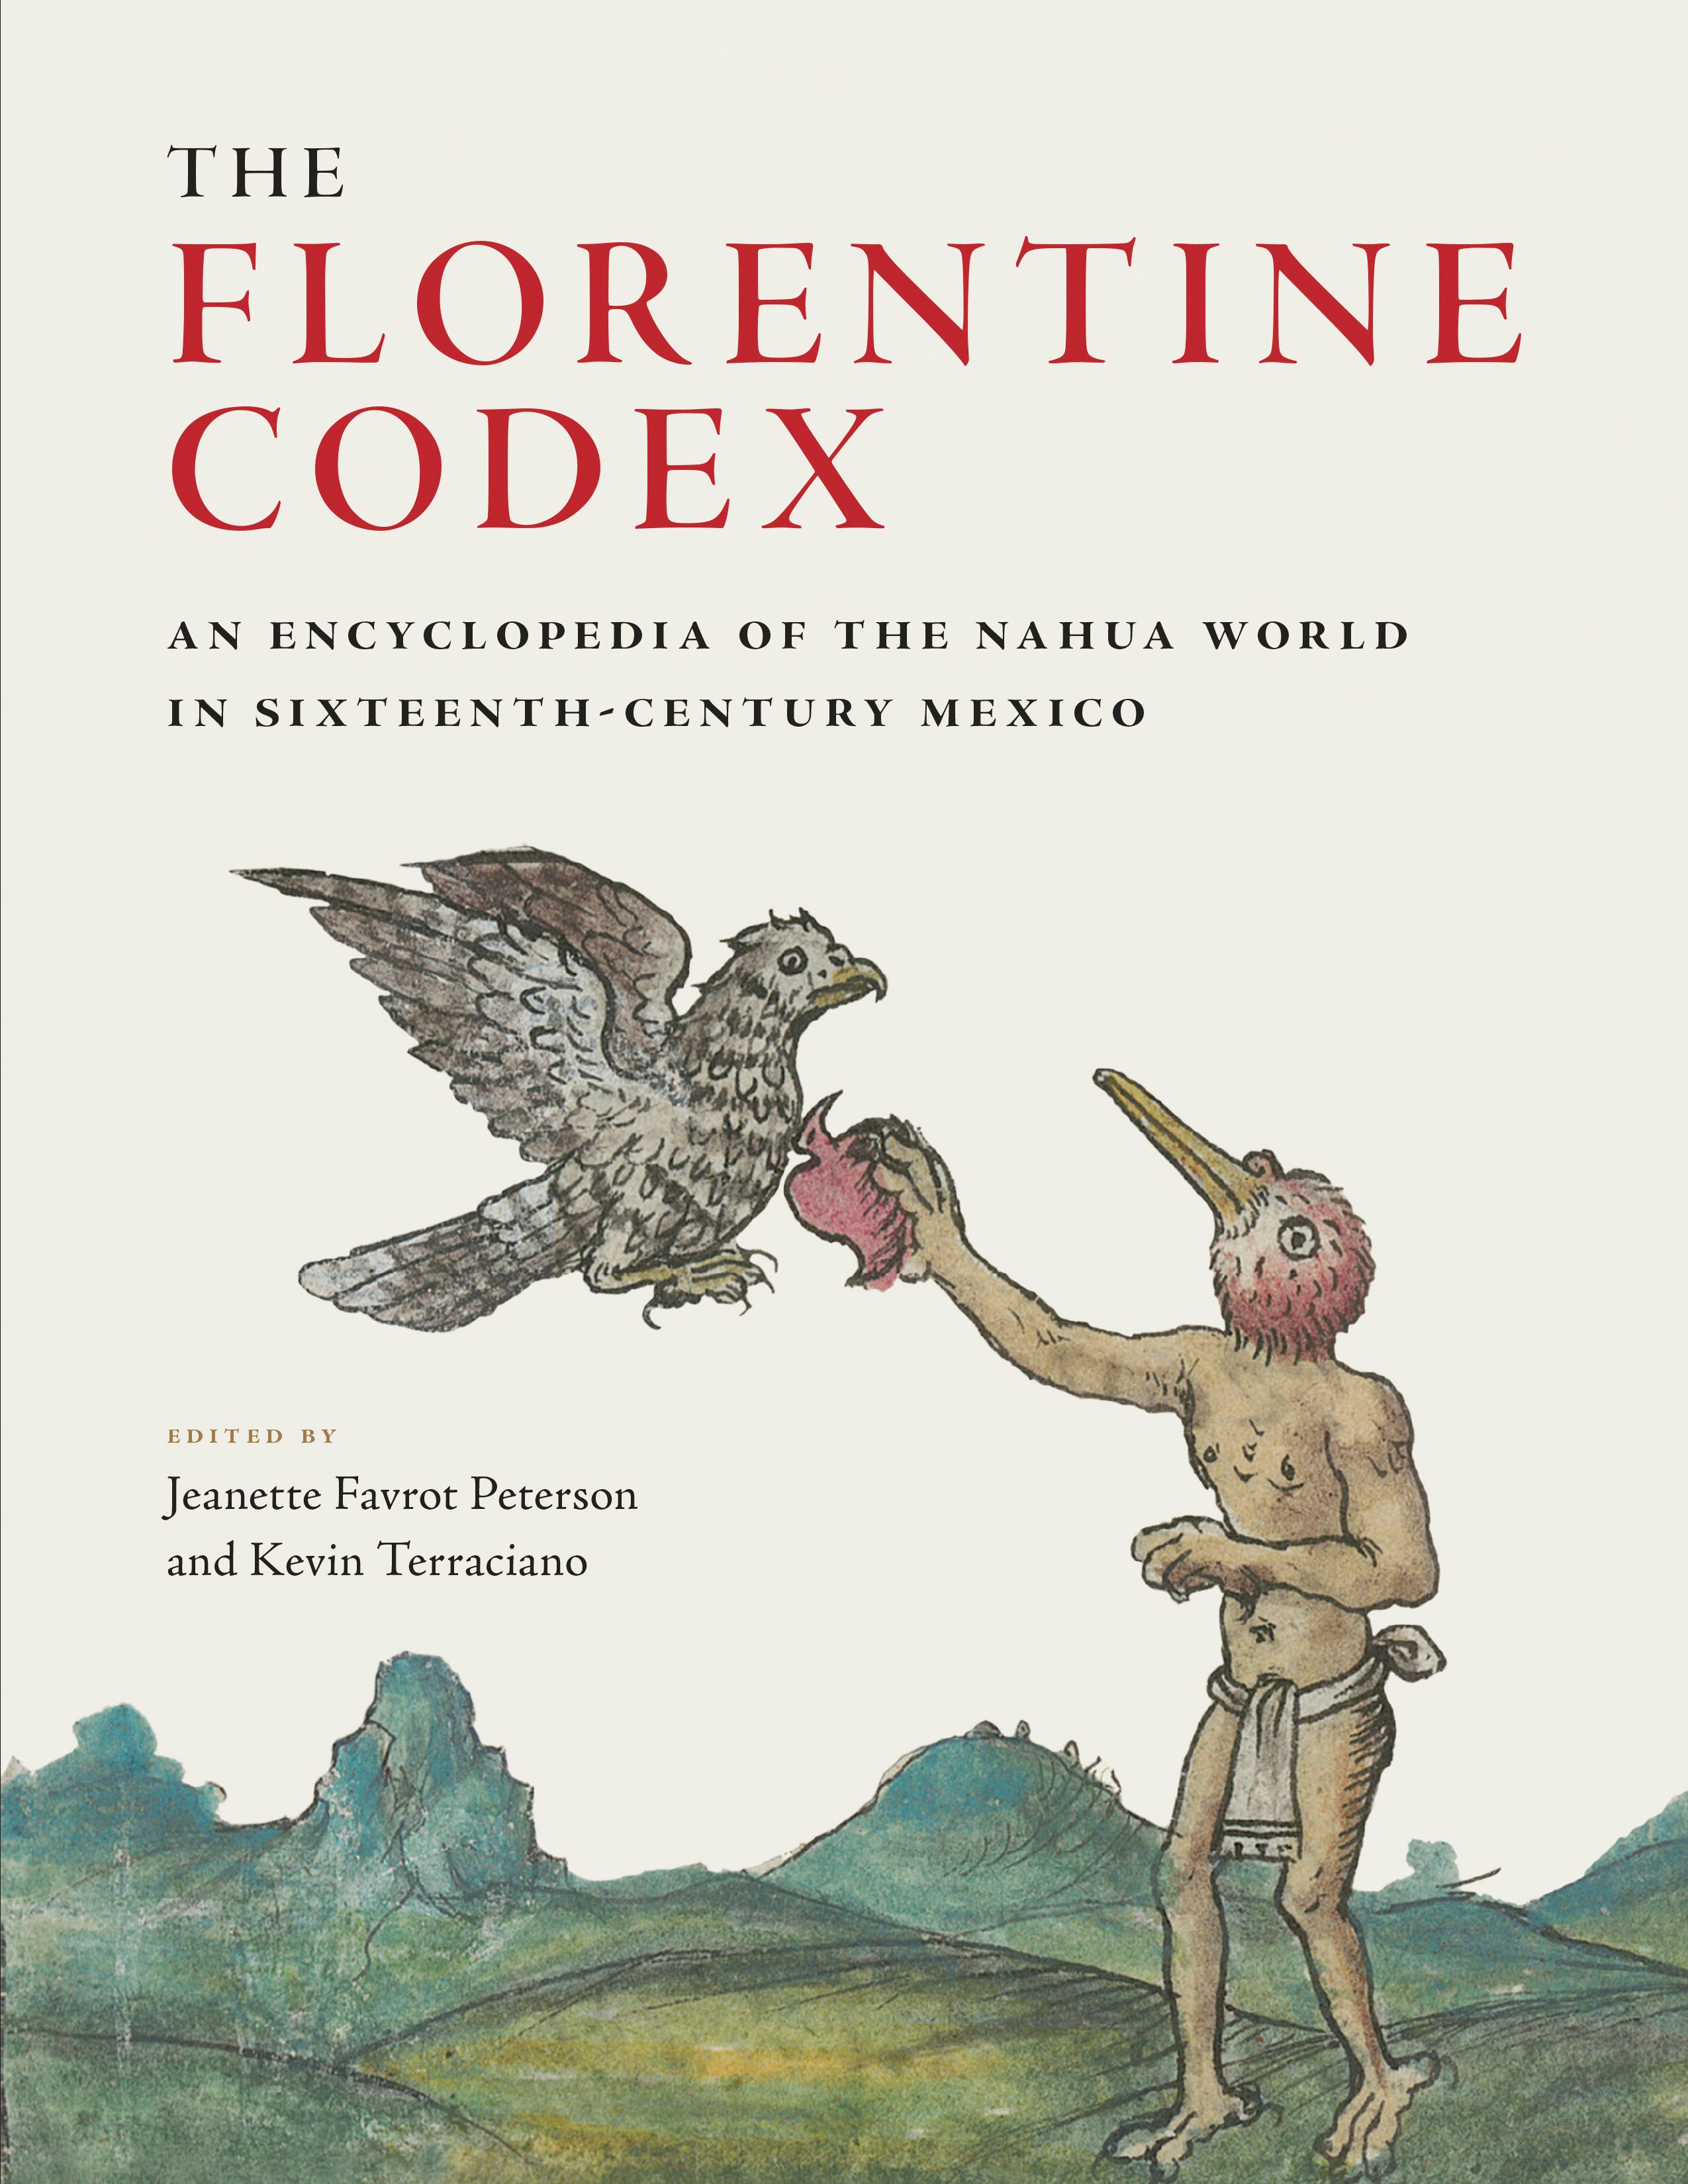 Florentine Customs and Practices (Chapter 7) - The Intellectual World of  Sixteenth-Century Florence